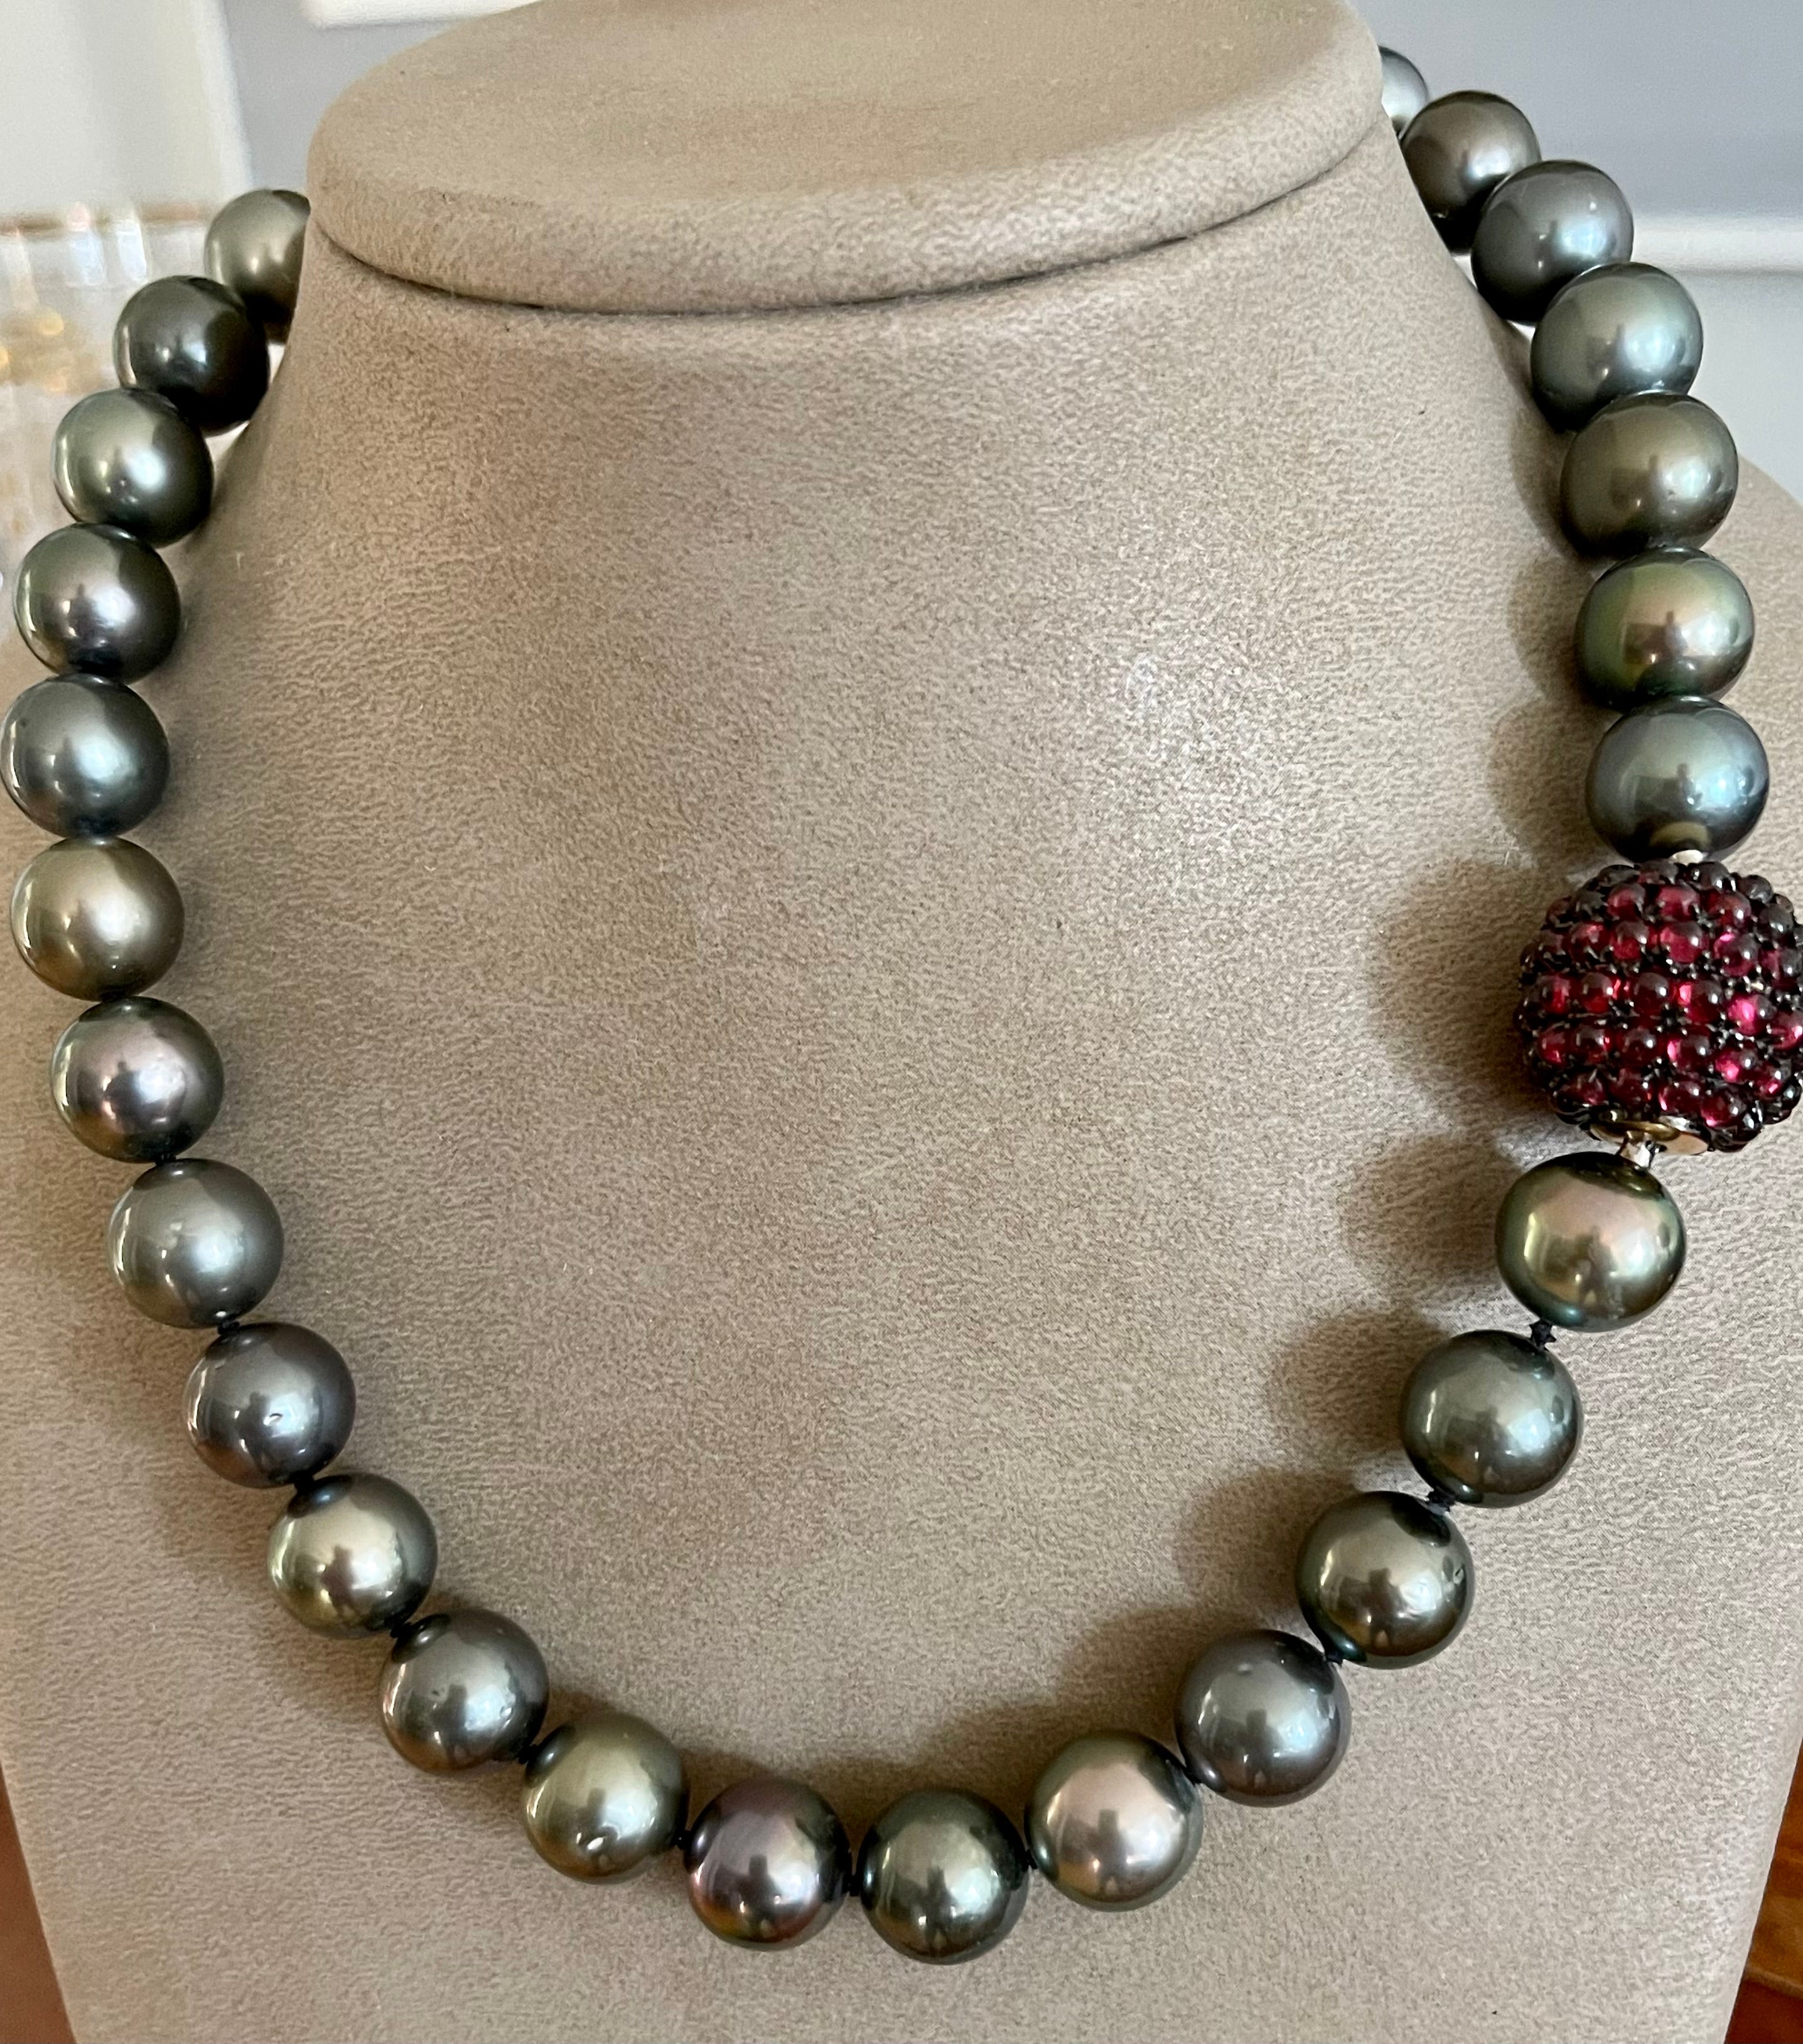 This strand of cultured Tahitian pearls consists of 33 round Pearls graduating from 12.5 mm - 13mm. The Body color of the pearls is a medium light gray with beautiful pink overtones. The pearls are of round to near round shapes, with a slightly